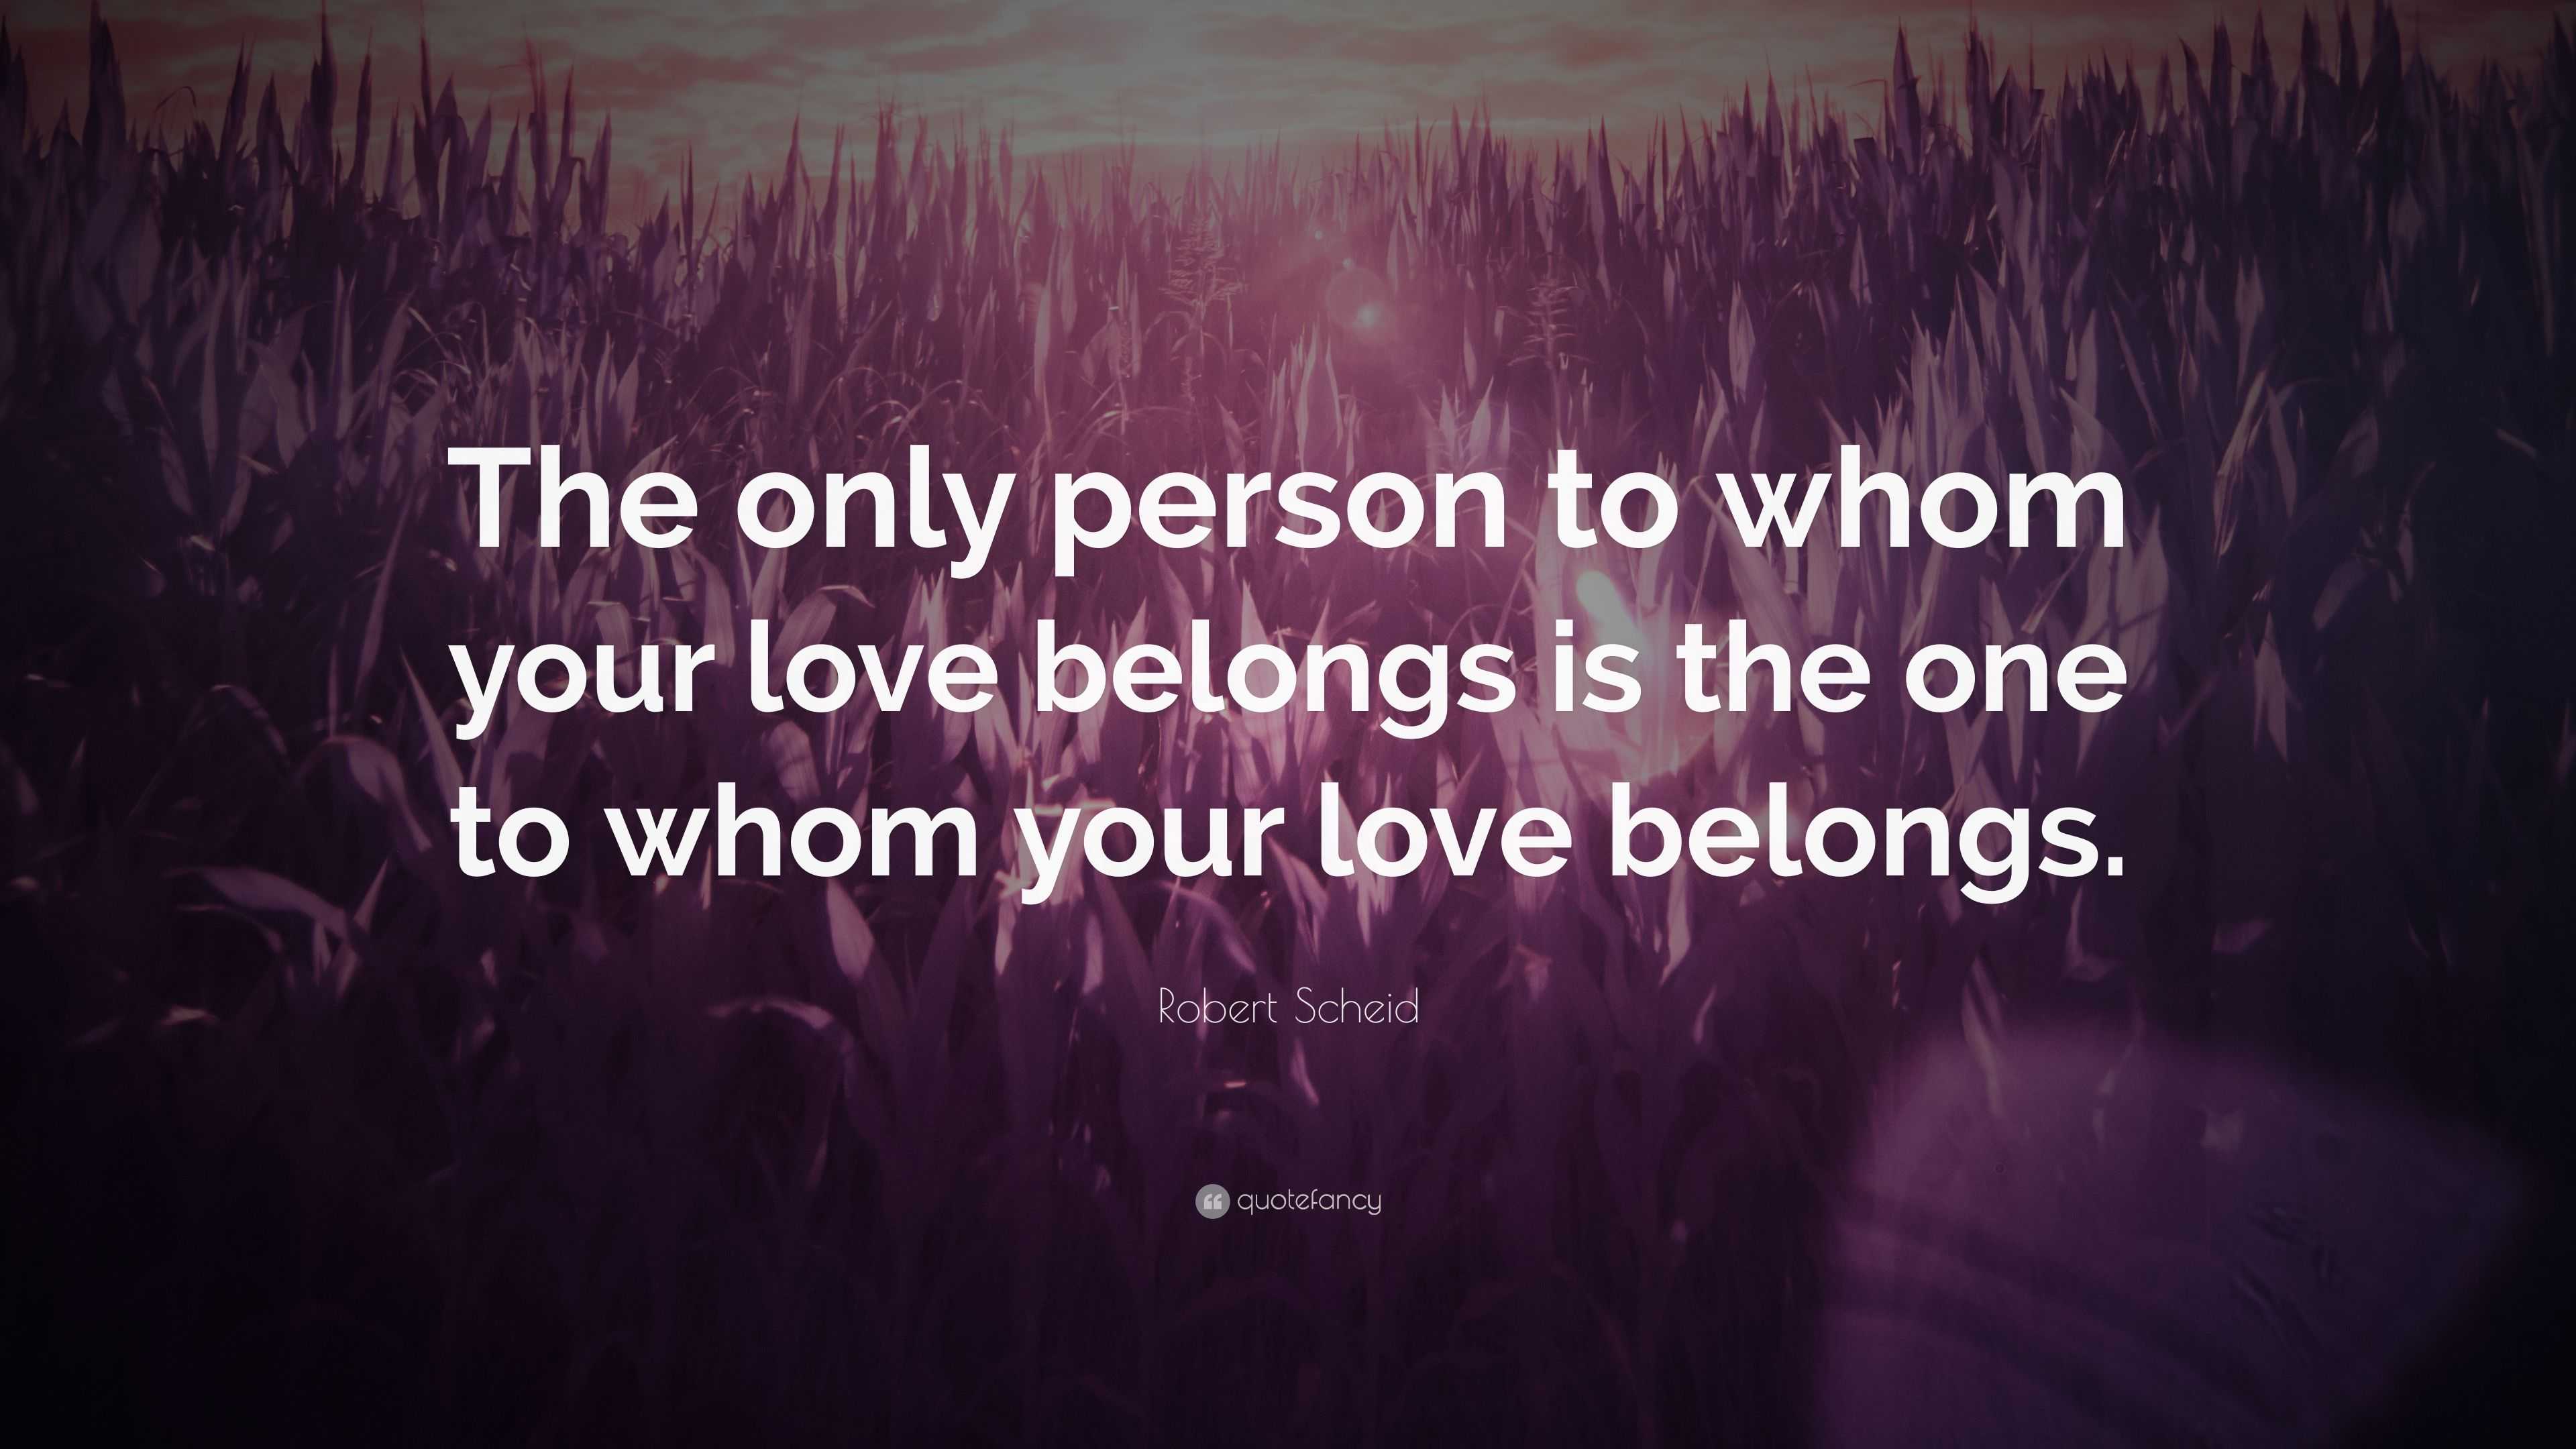 Robert Scheid Quote: “The only person to whom your love belongs is the ...